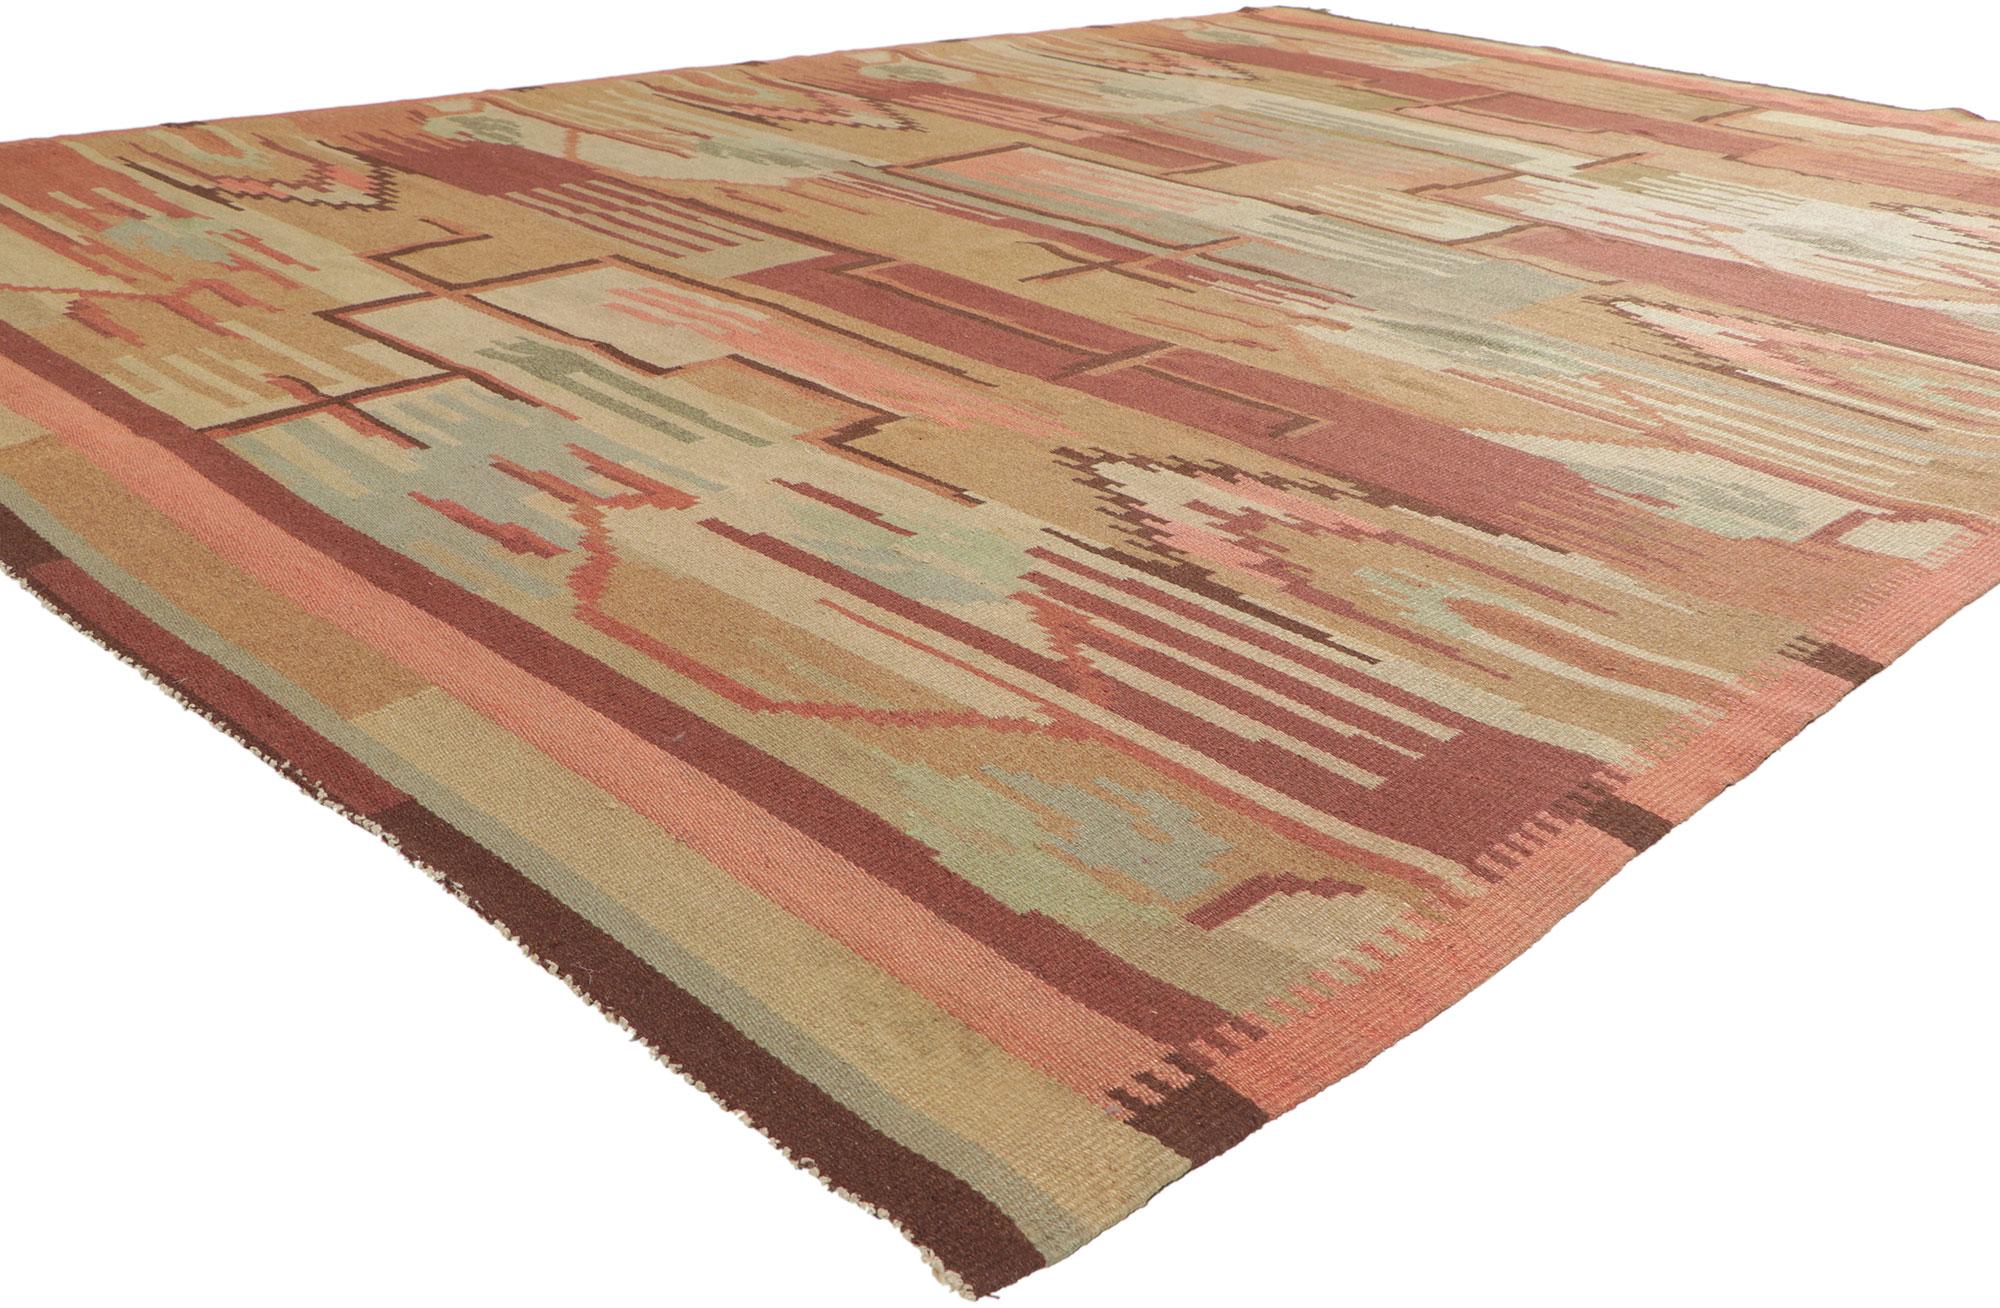 78465 Greta Skogster-Lehtinen Finnish Flatweave Rug, 07'11 x 11'01. Bauhaus simplicity meets stylized Art Deco in this handwoven Finnish flatweave rug. The eye-catching geometric design and earthy colorway woven into this piece work together